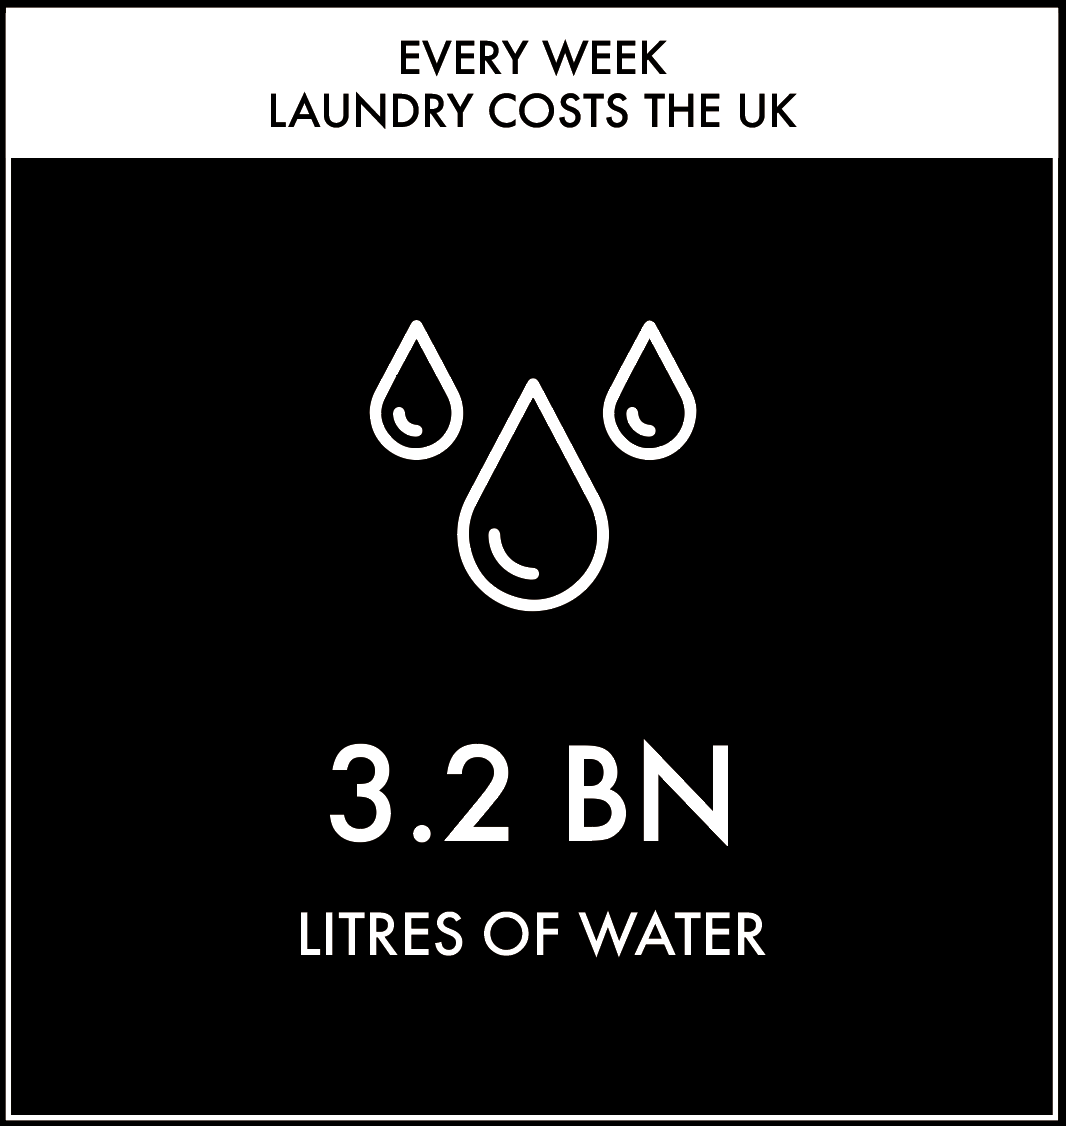 laundry washing water crisis environment h20 every week UK united Kingdom London water shortage  dry wash solution startup innovation clean science 